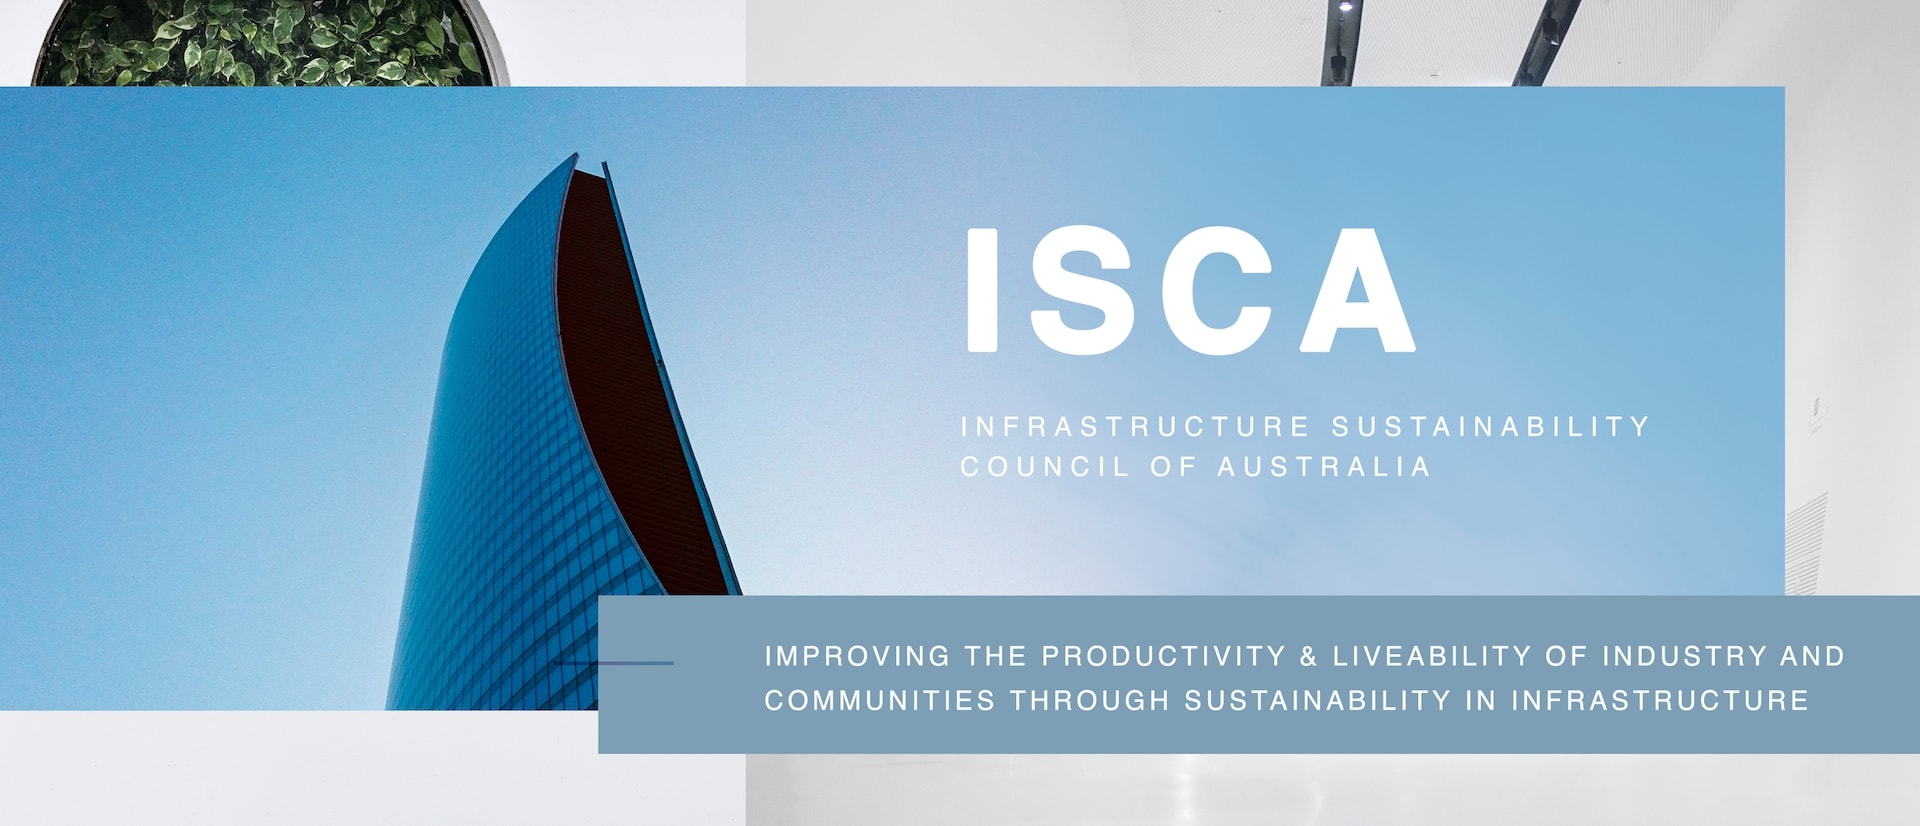 Infrastructure Sustainability Council Of Australia